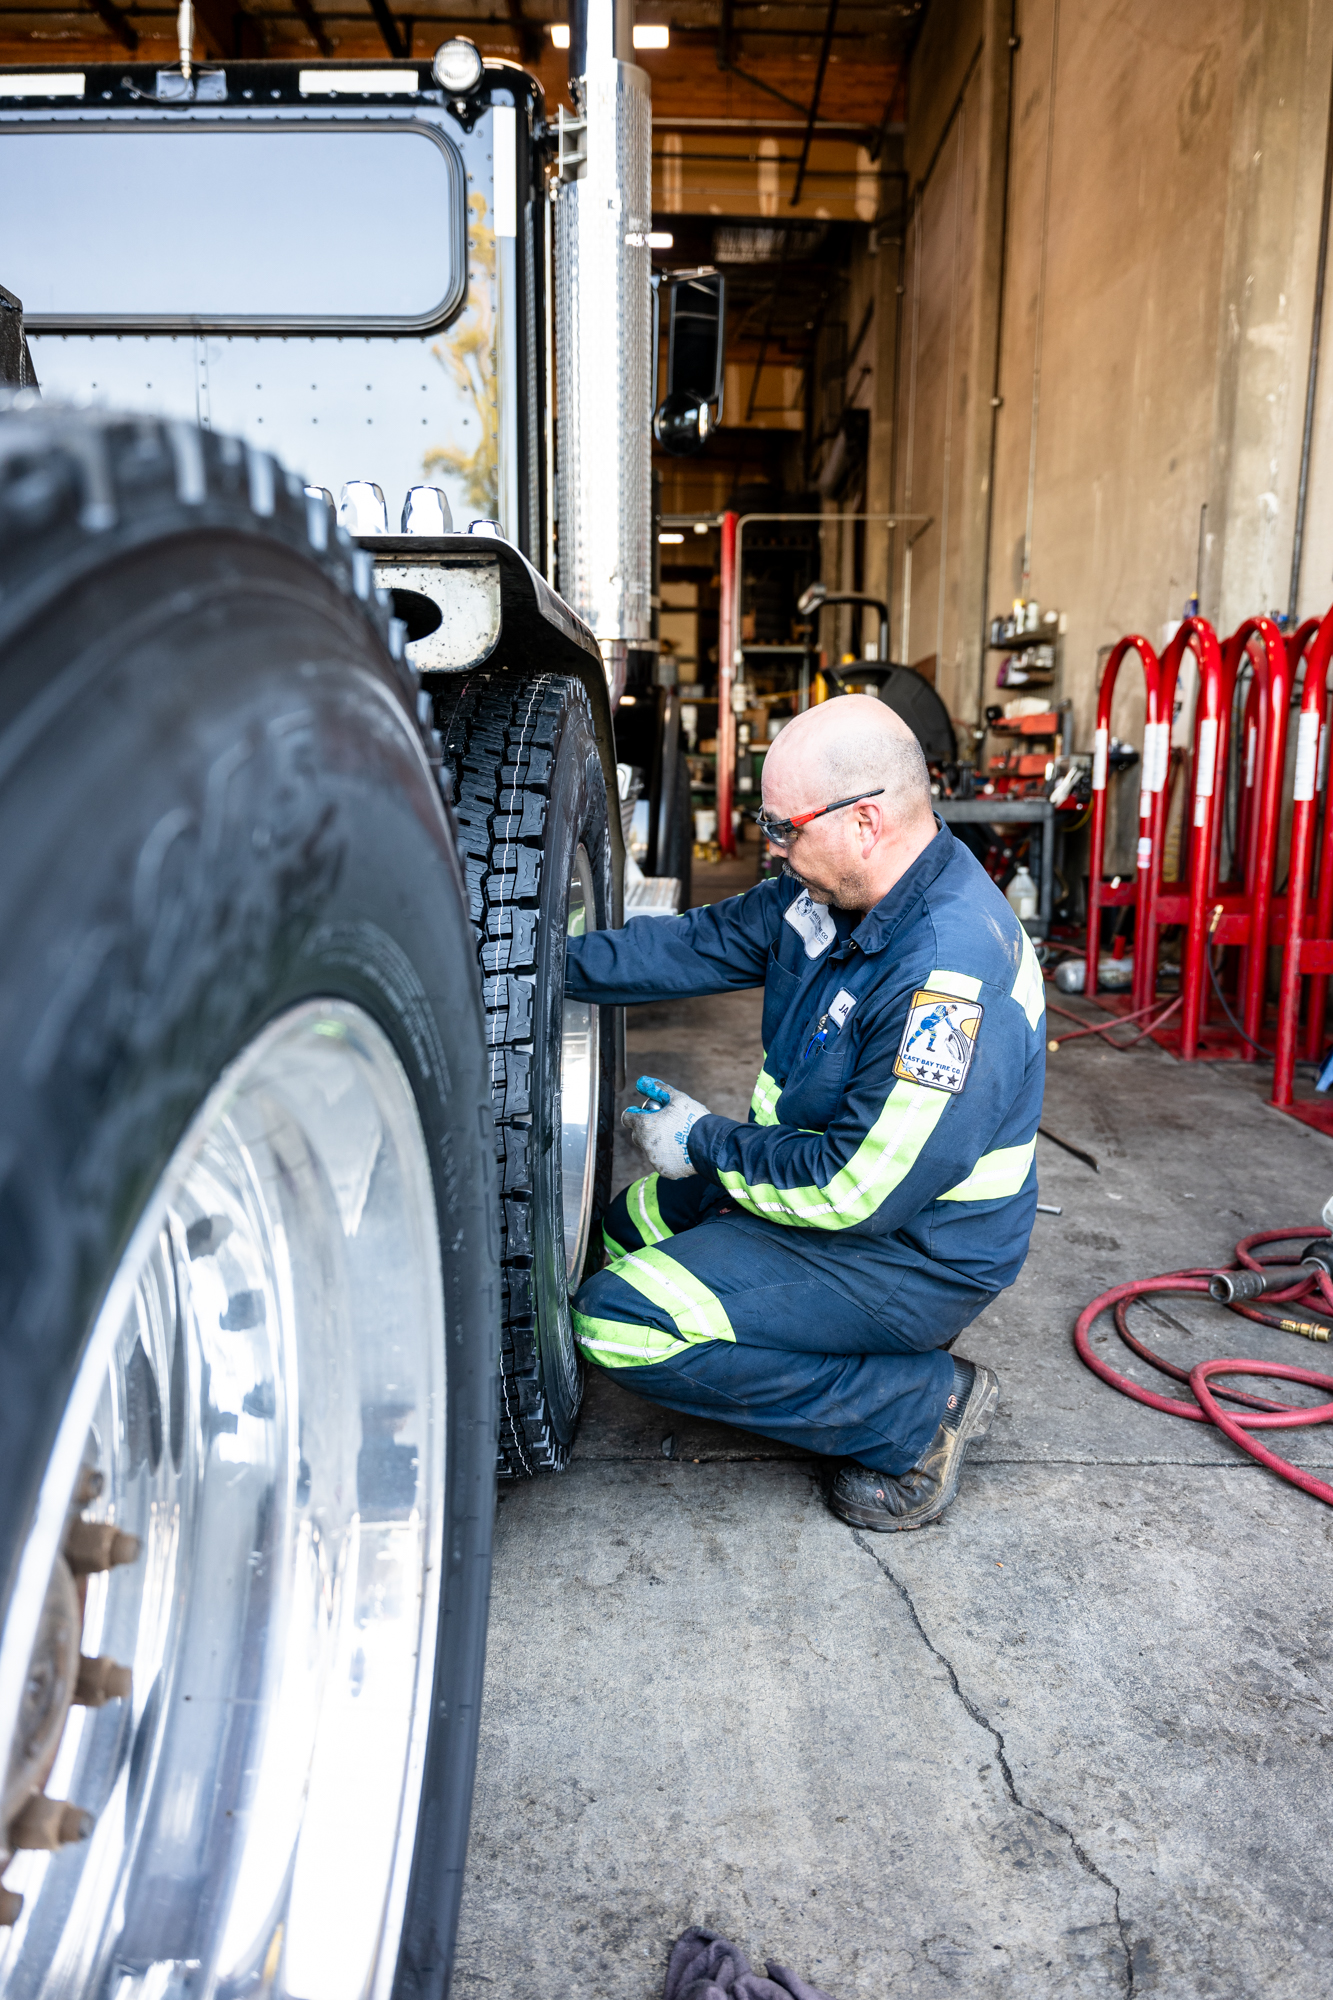 East Bay Tire employee working on the wheel of a truck